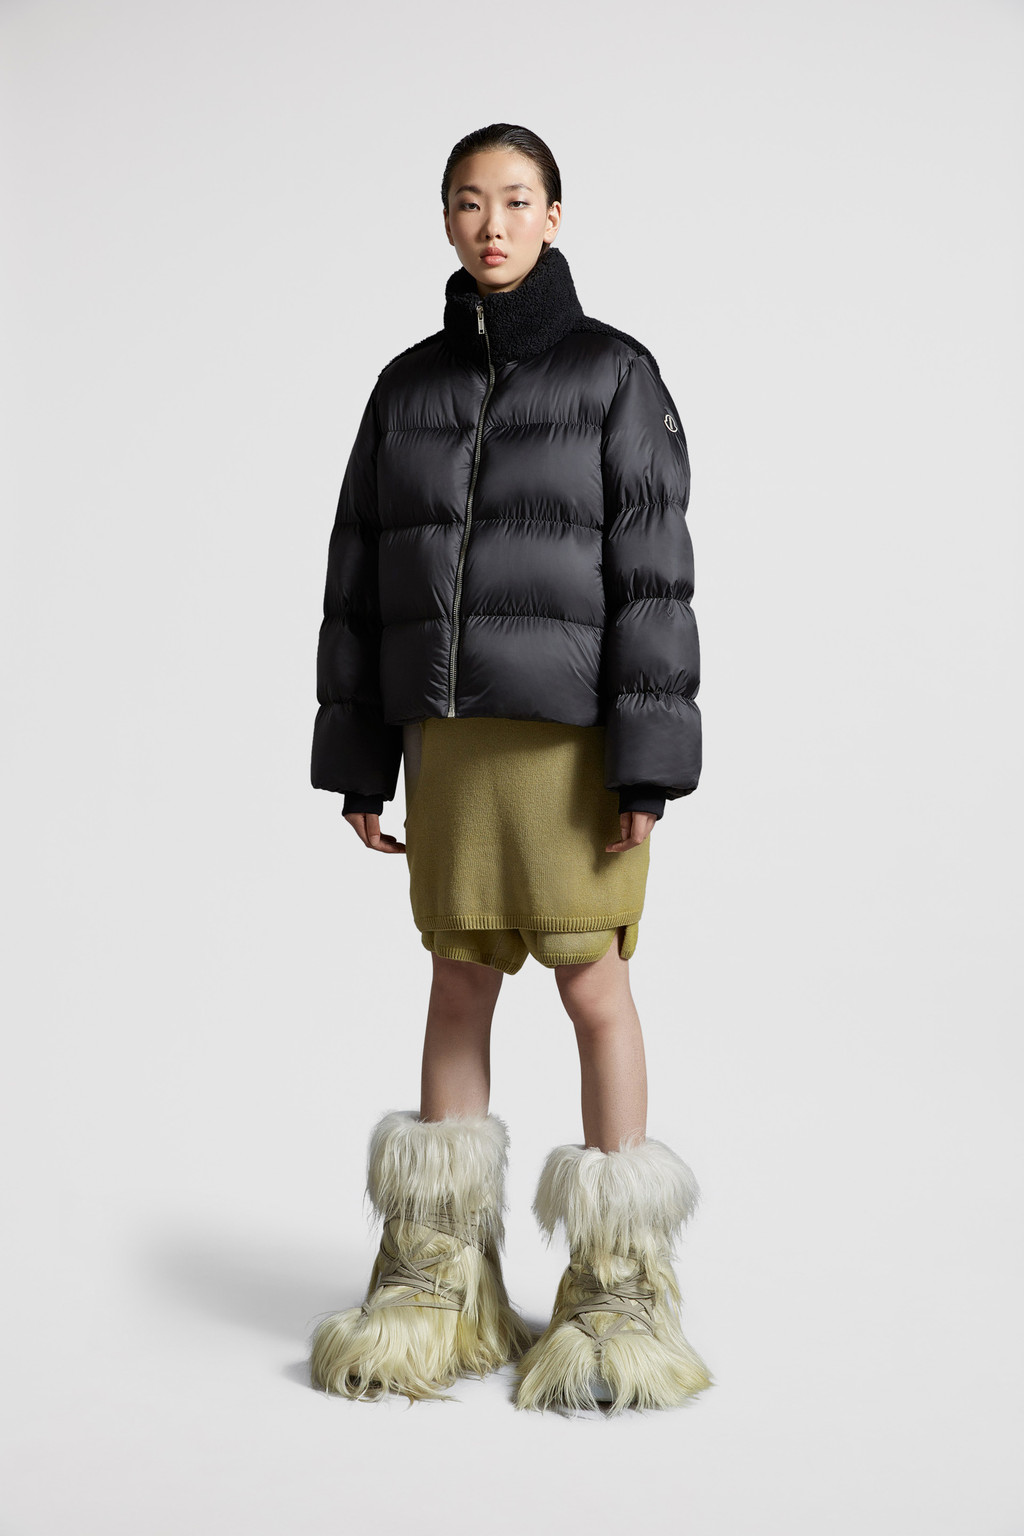 For Special Projects - Moncler + Rick Owens | Moncler JP